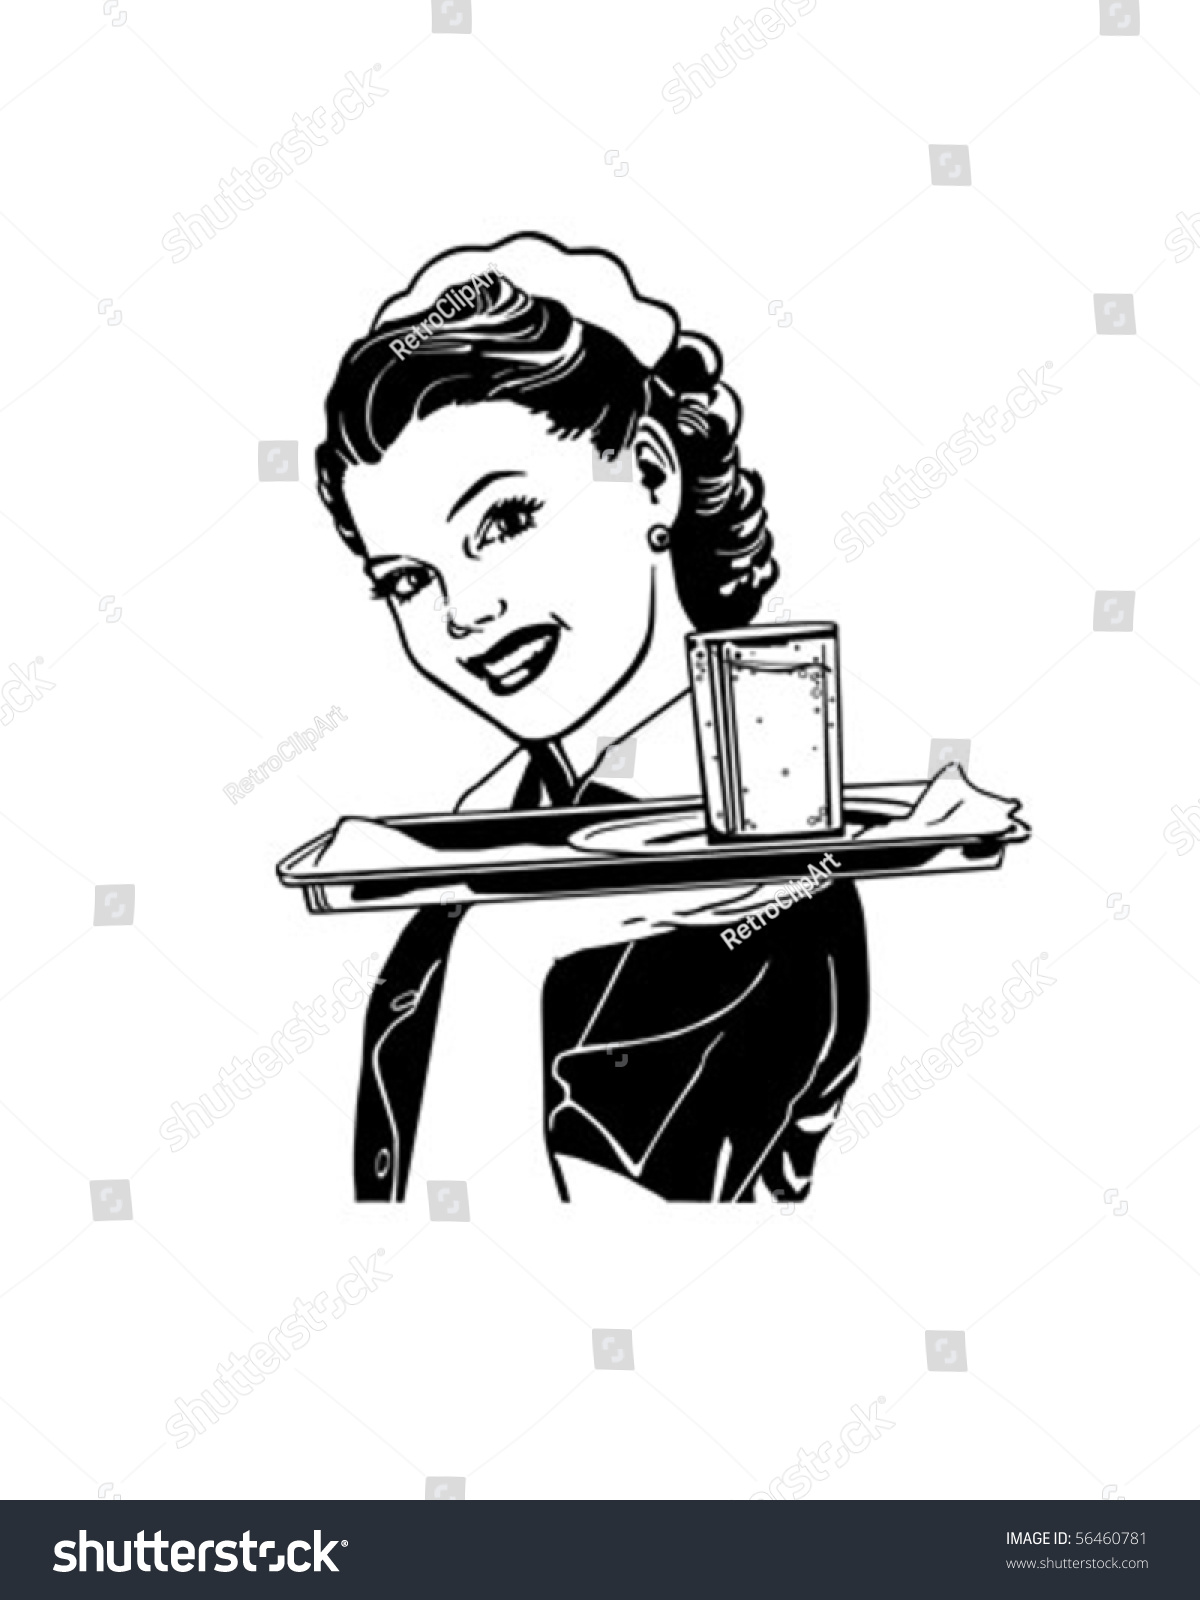 clipart serving coffee - photo #30